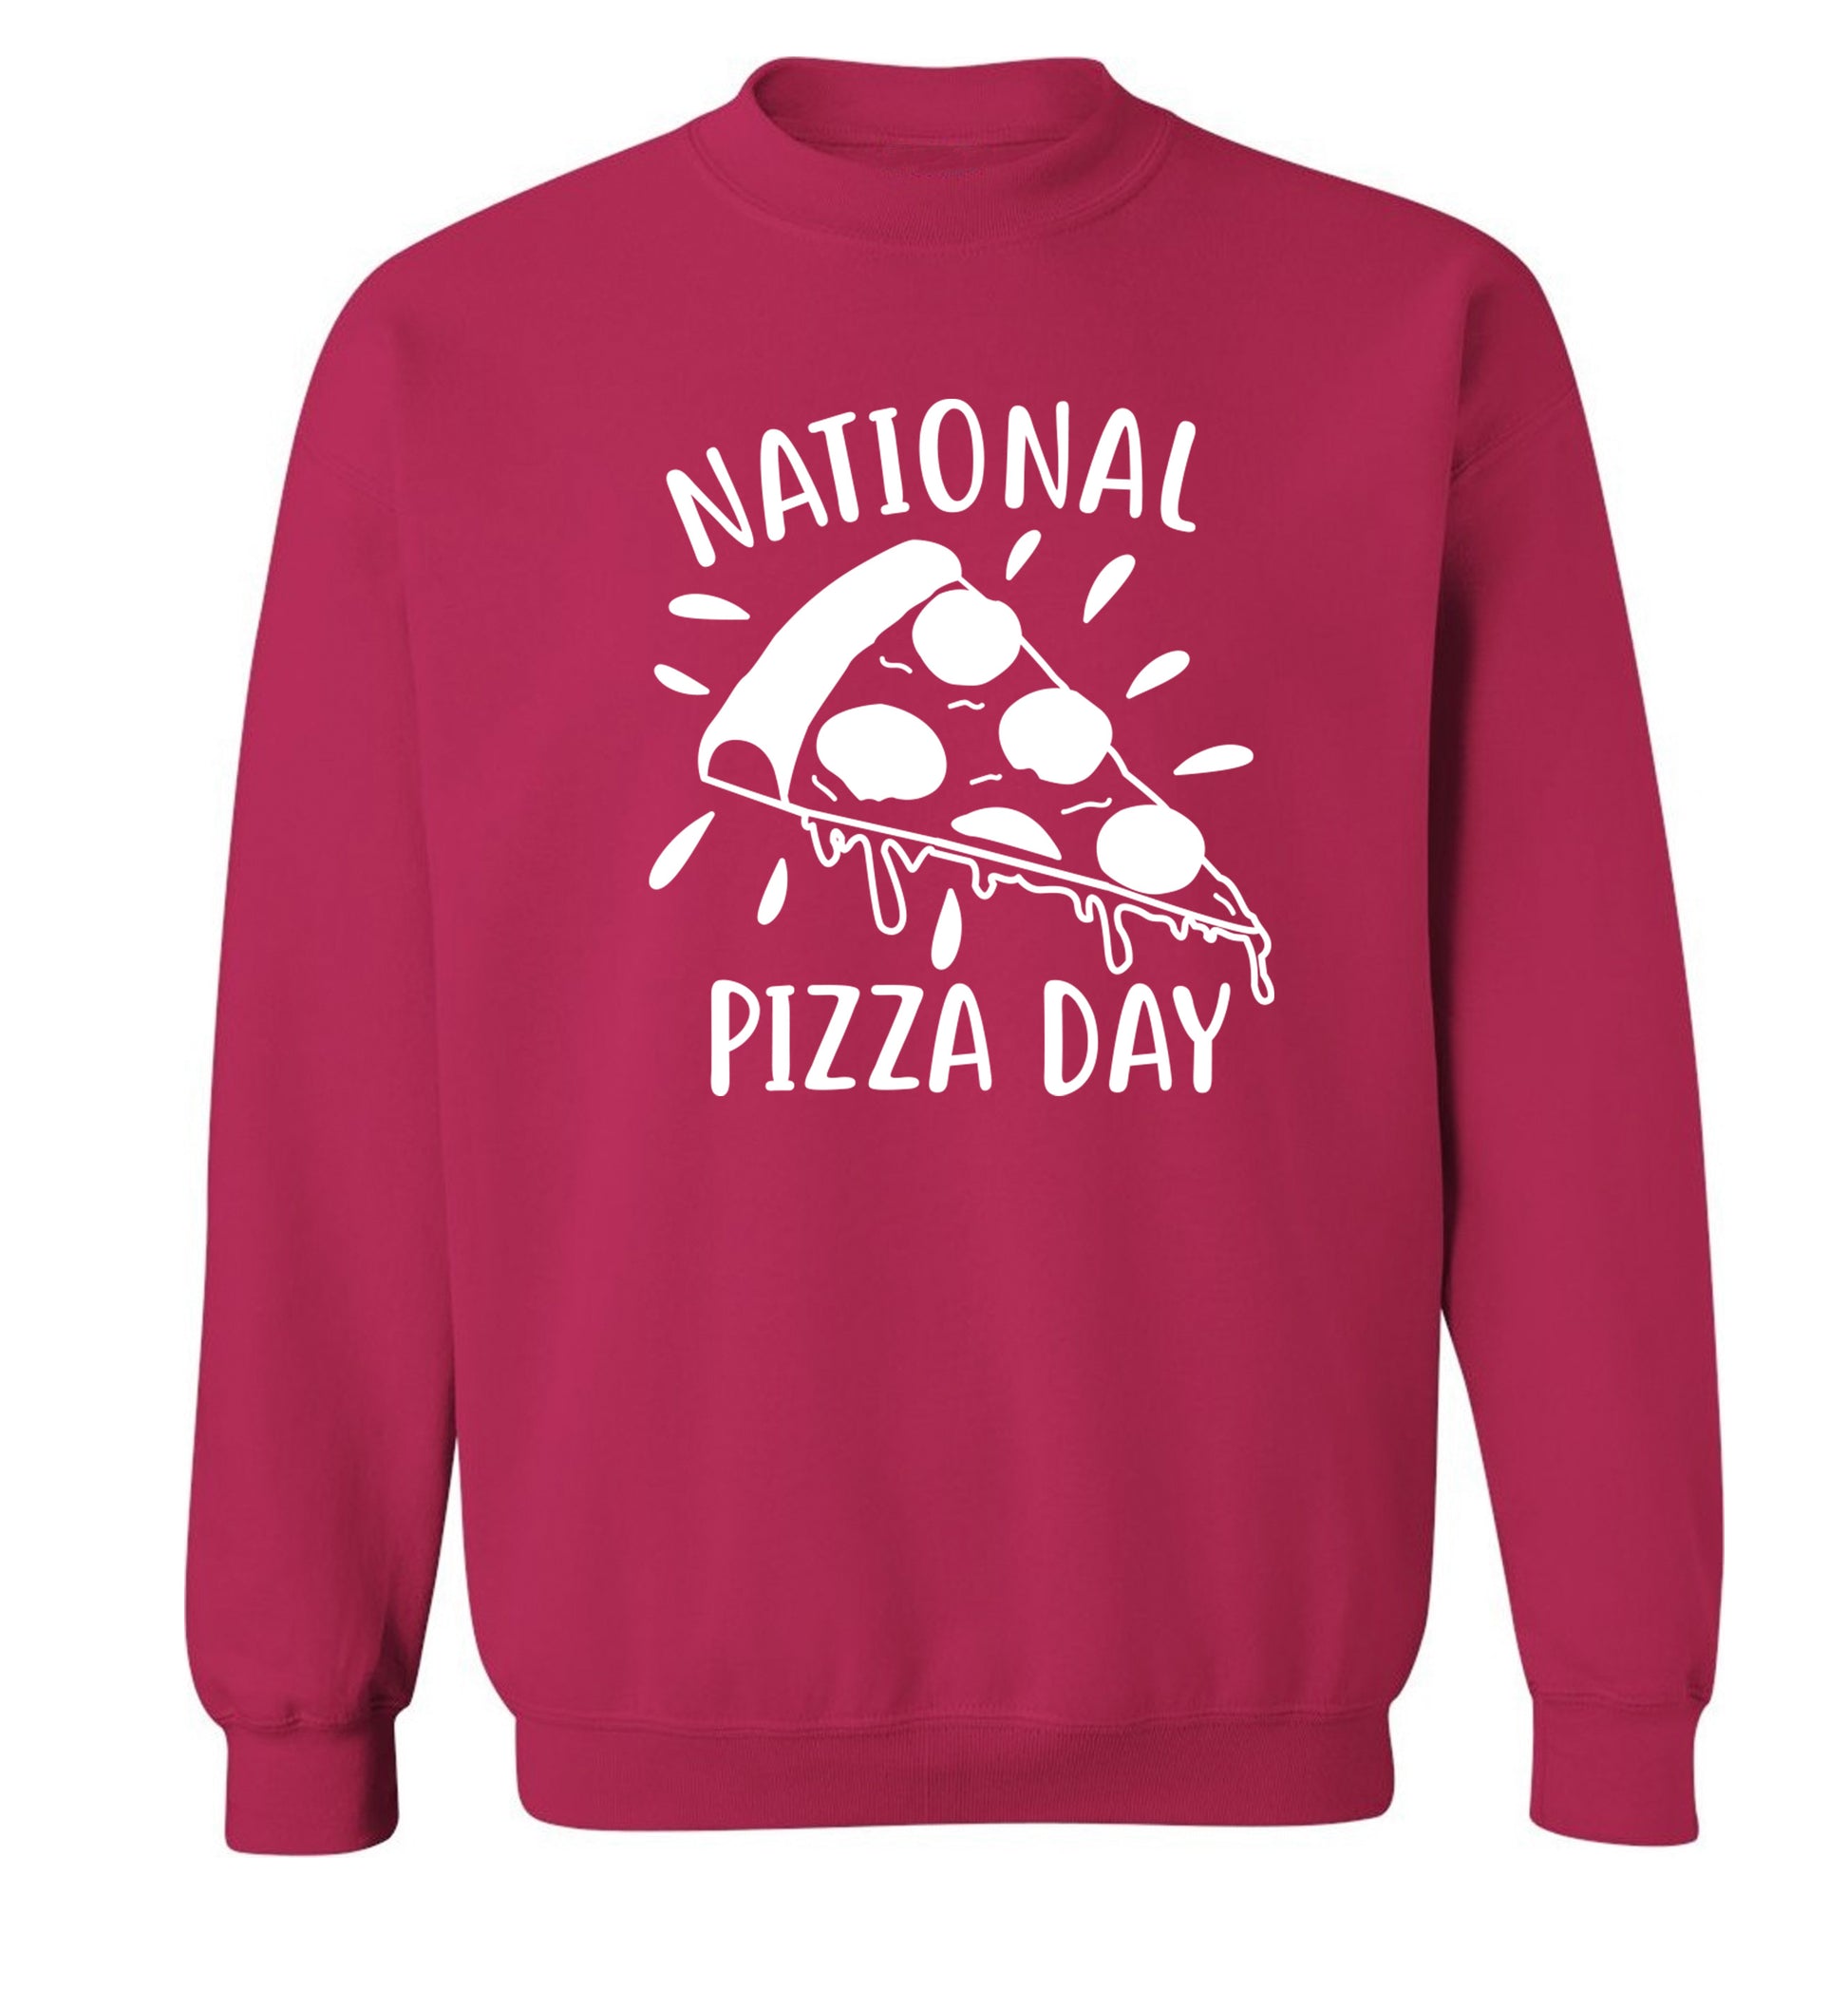 National pizza day Adult's unisex pink Sweater 2XL